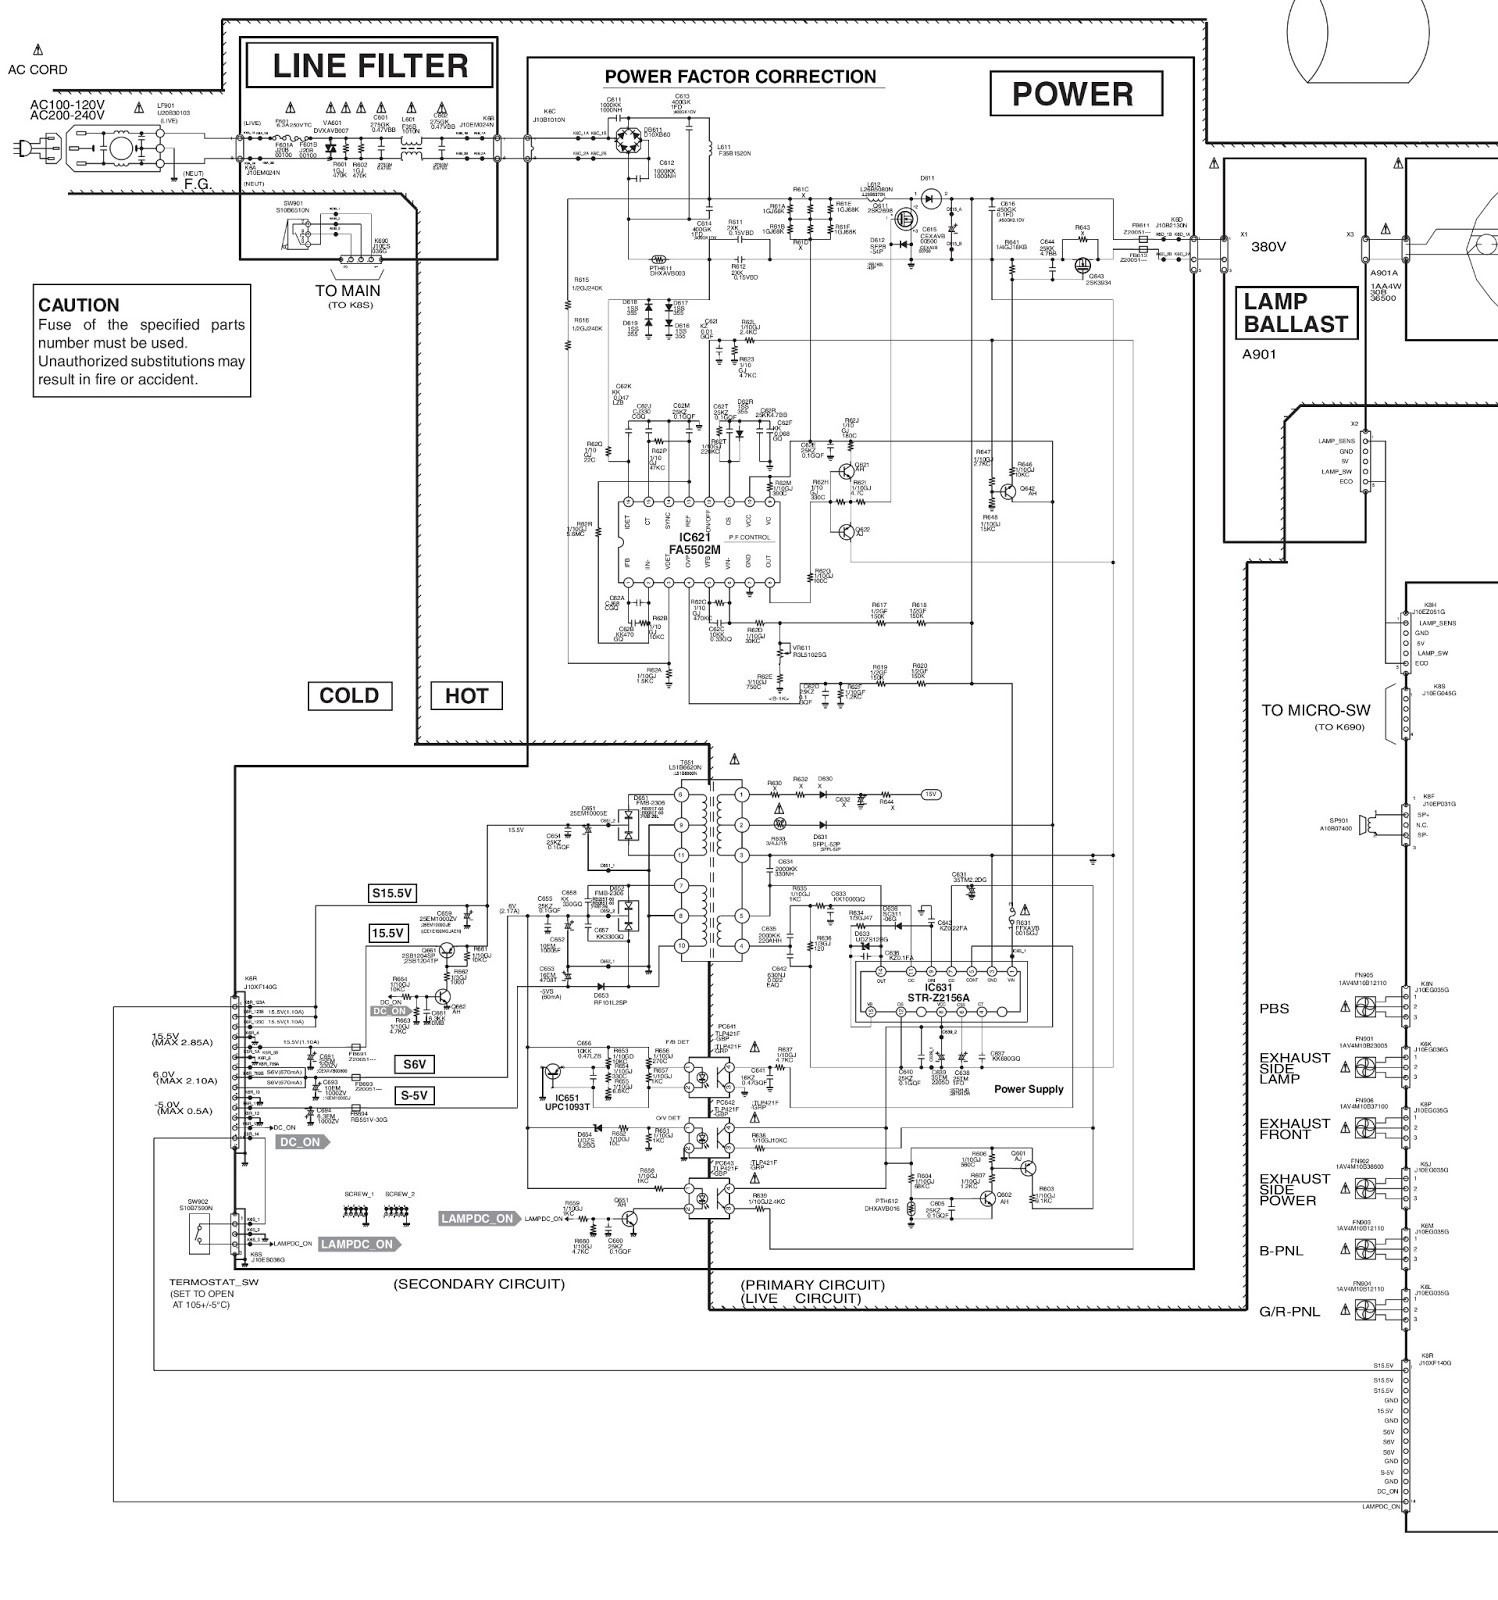 Sanyo Plc Xu87 Projector Power Supply Schematic Diagram Image To Enlarge electrical installation